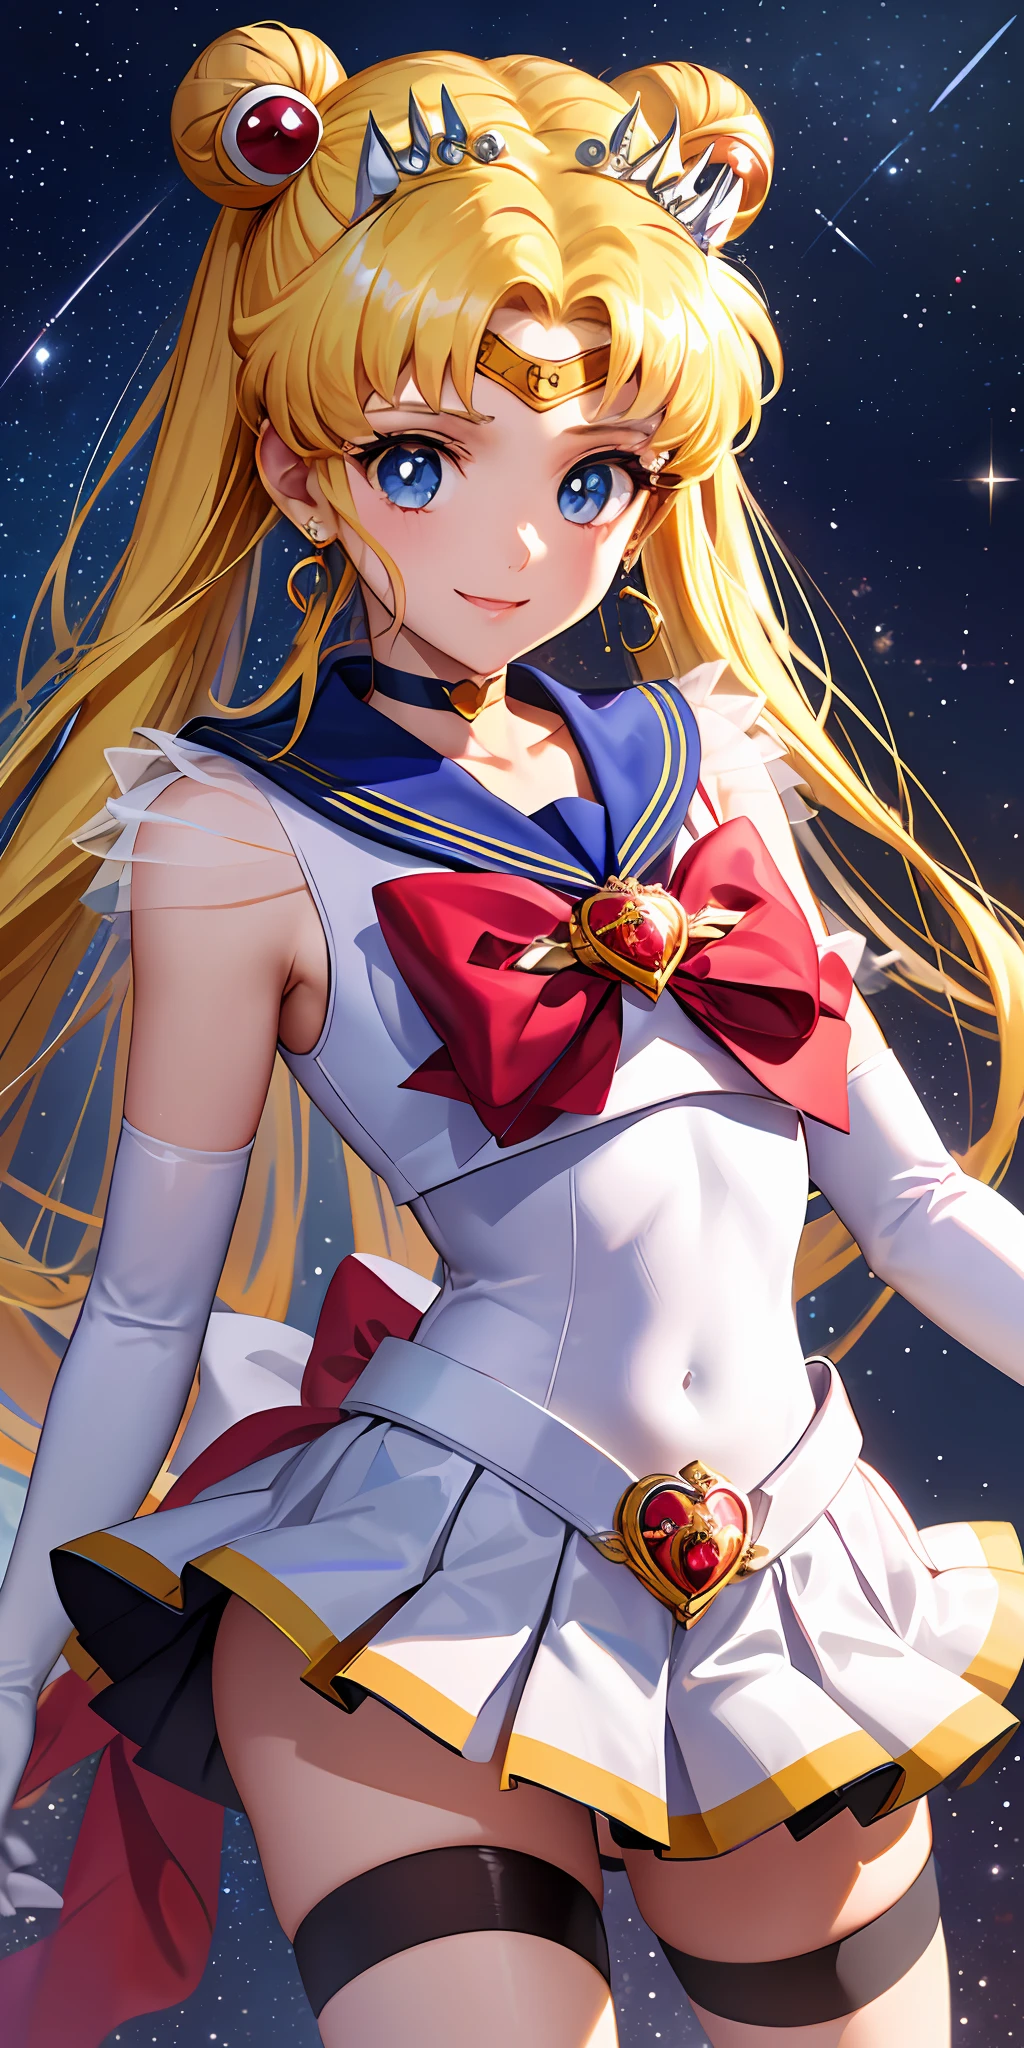 Masterpiece, Best Quality, Hi-Res, Moon 1, 1 Girl, Solo, Sailor Senshi Uniform, Sailor Moon, Usagi Tsukino, Blonde, Magical Girl, Blue Eyes, White Panties, Red Scarf, Elbow Gloves, Tiara, Blue Skirt, Pleated Skirt, Mini Skirt, Choker, White Gloves, Jewelry, Earrings, Smile, Background Is Space (Excellent Detail, Excellent Lighting, Wide Angle), Show panties,